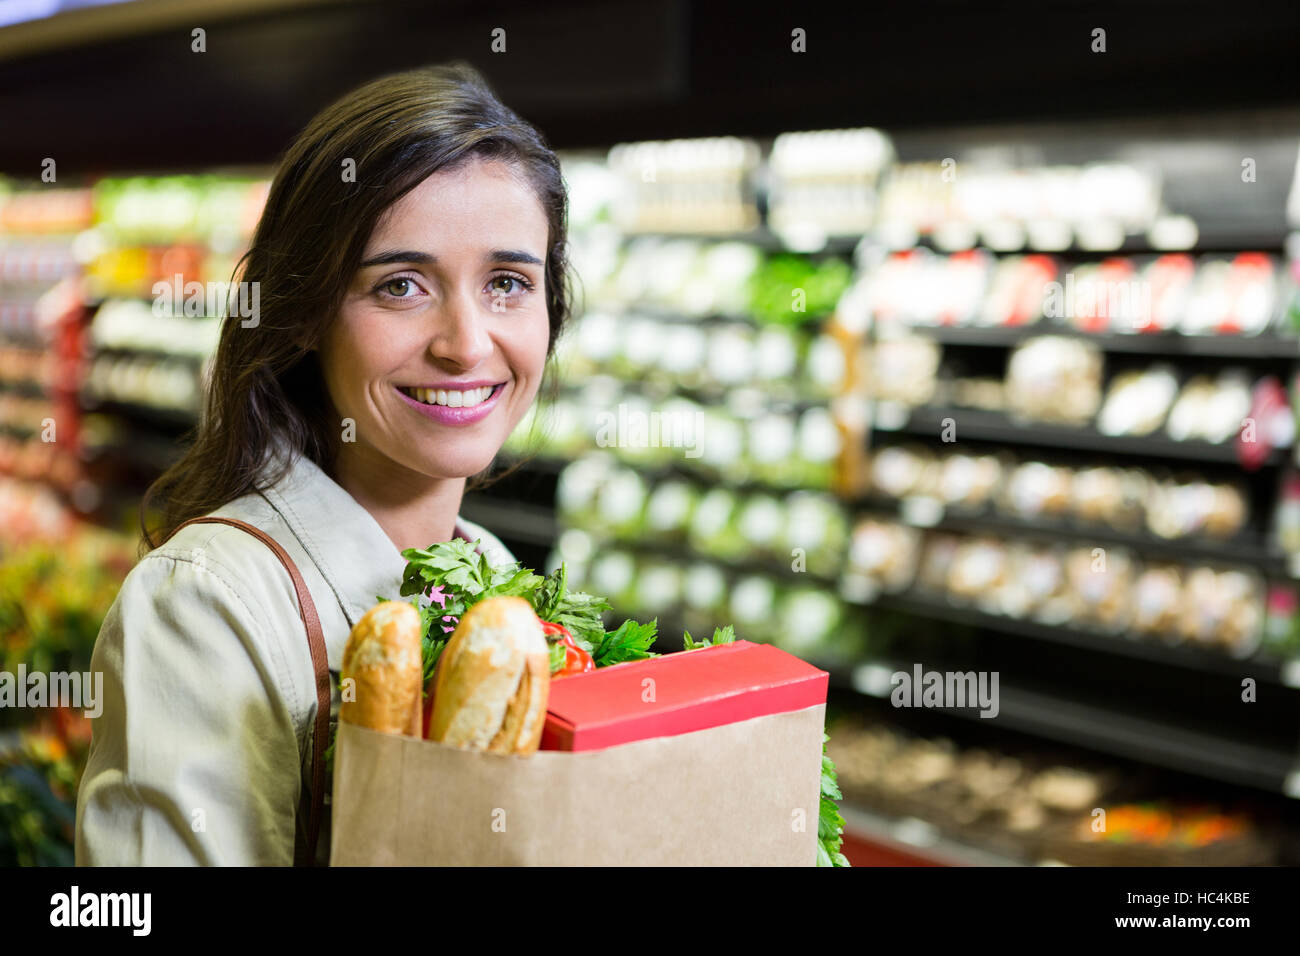 Portrait of smiling woman holding a grocery bag in organic section Stock Photo